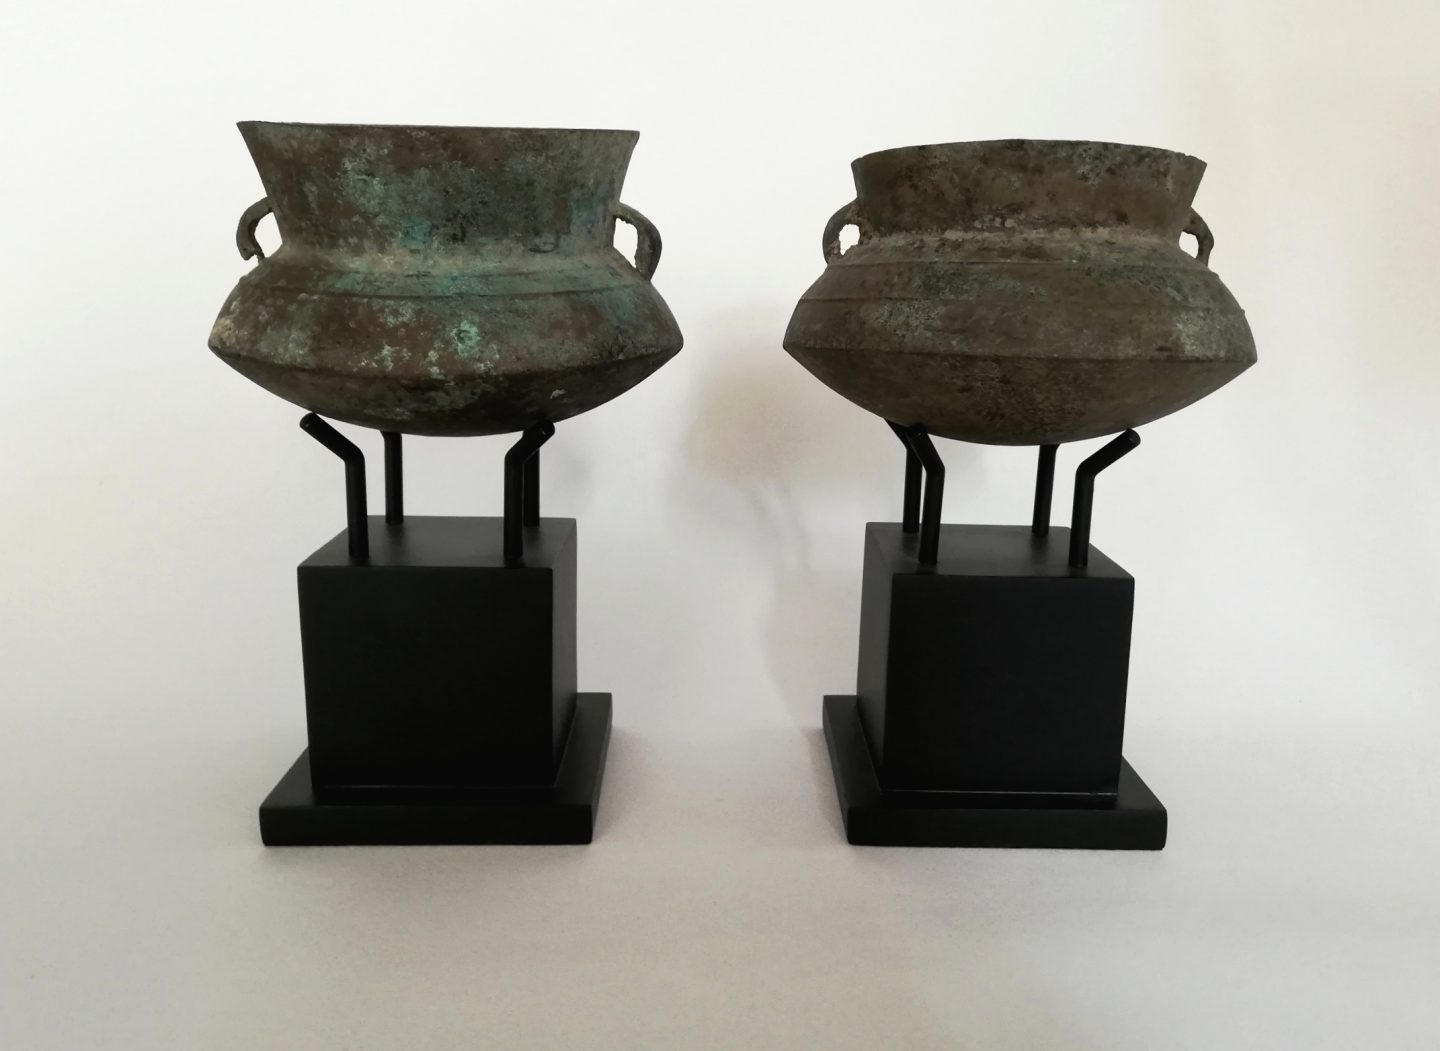 Two bronze bowls, Isan